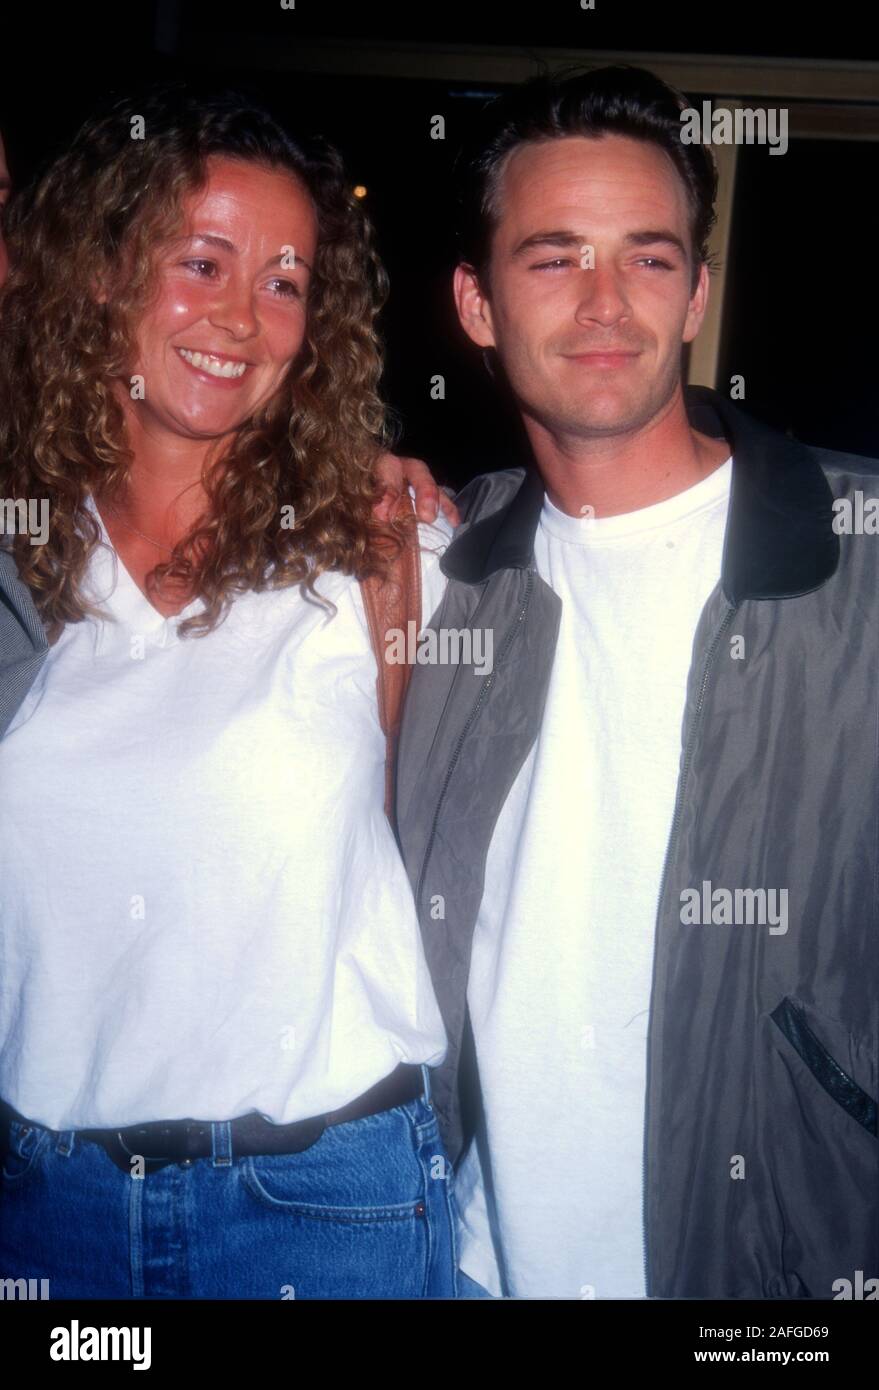 Beverly Hills California Usa 3rd April 1995 Actor Luke Perry And Wife Minnie Rachel Sharp Attend New Line Cinema S Don Juan Demarco Premiere On April 3 1995 At The Academy Theatre In